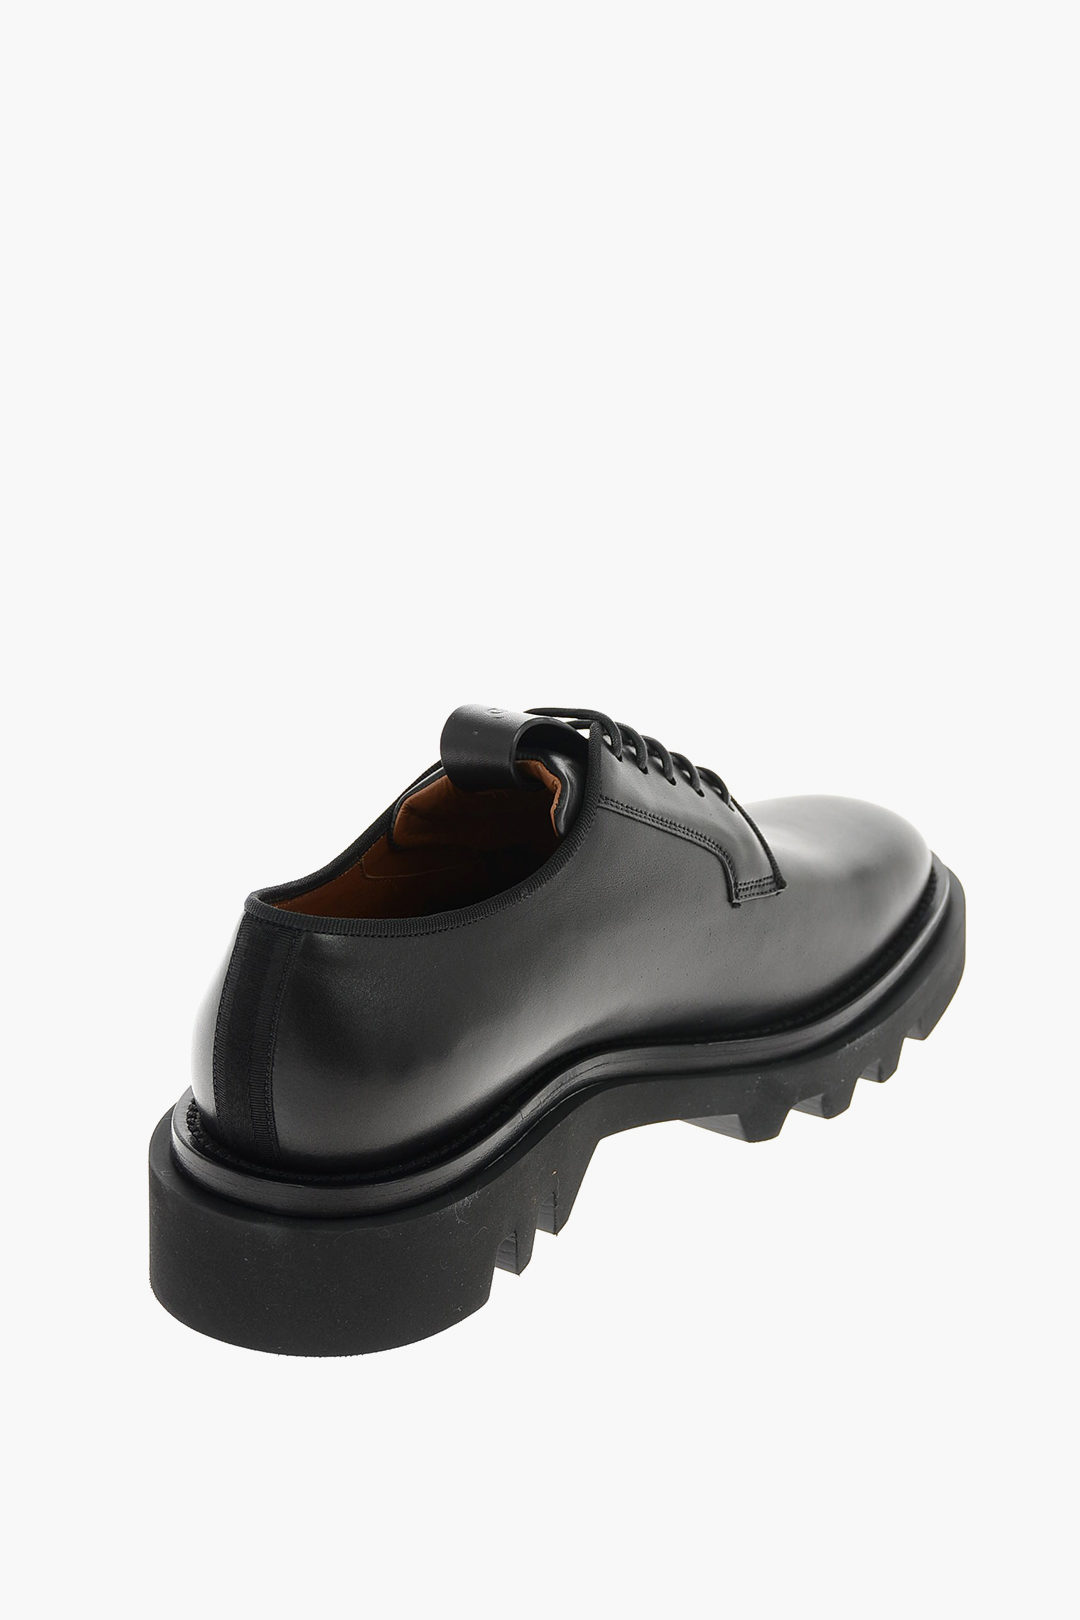 Givenchy Treaded sole leather Derby shoes men - Glamood Outlet